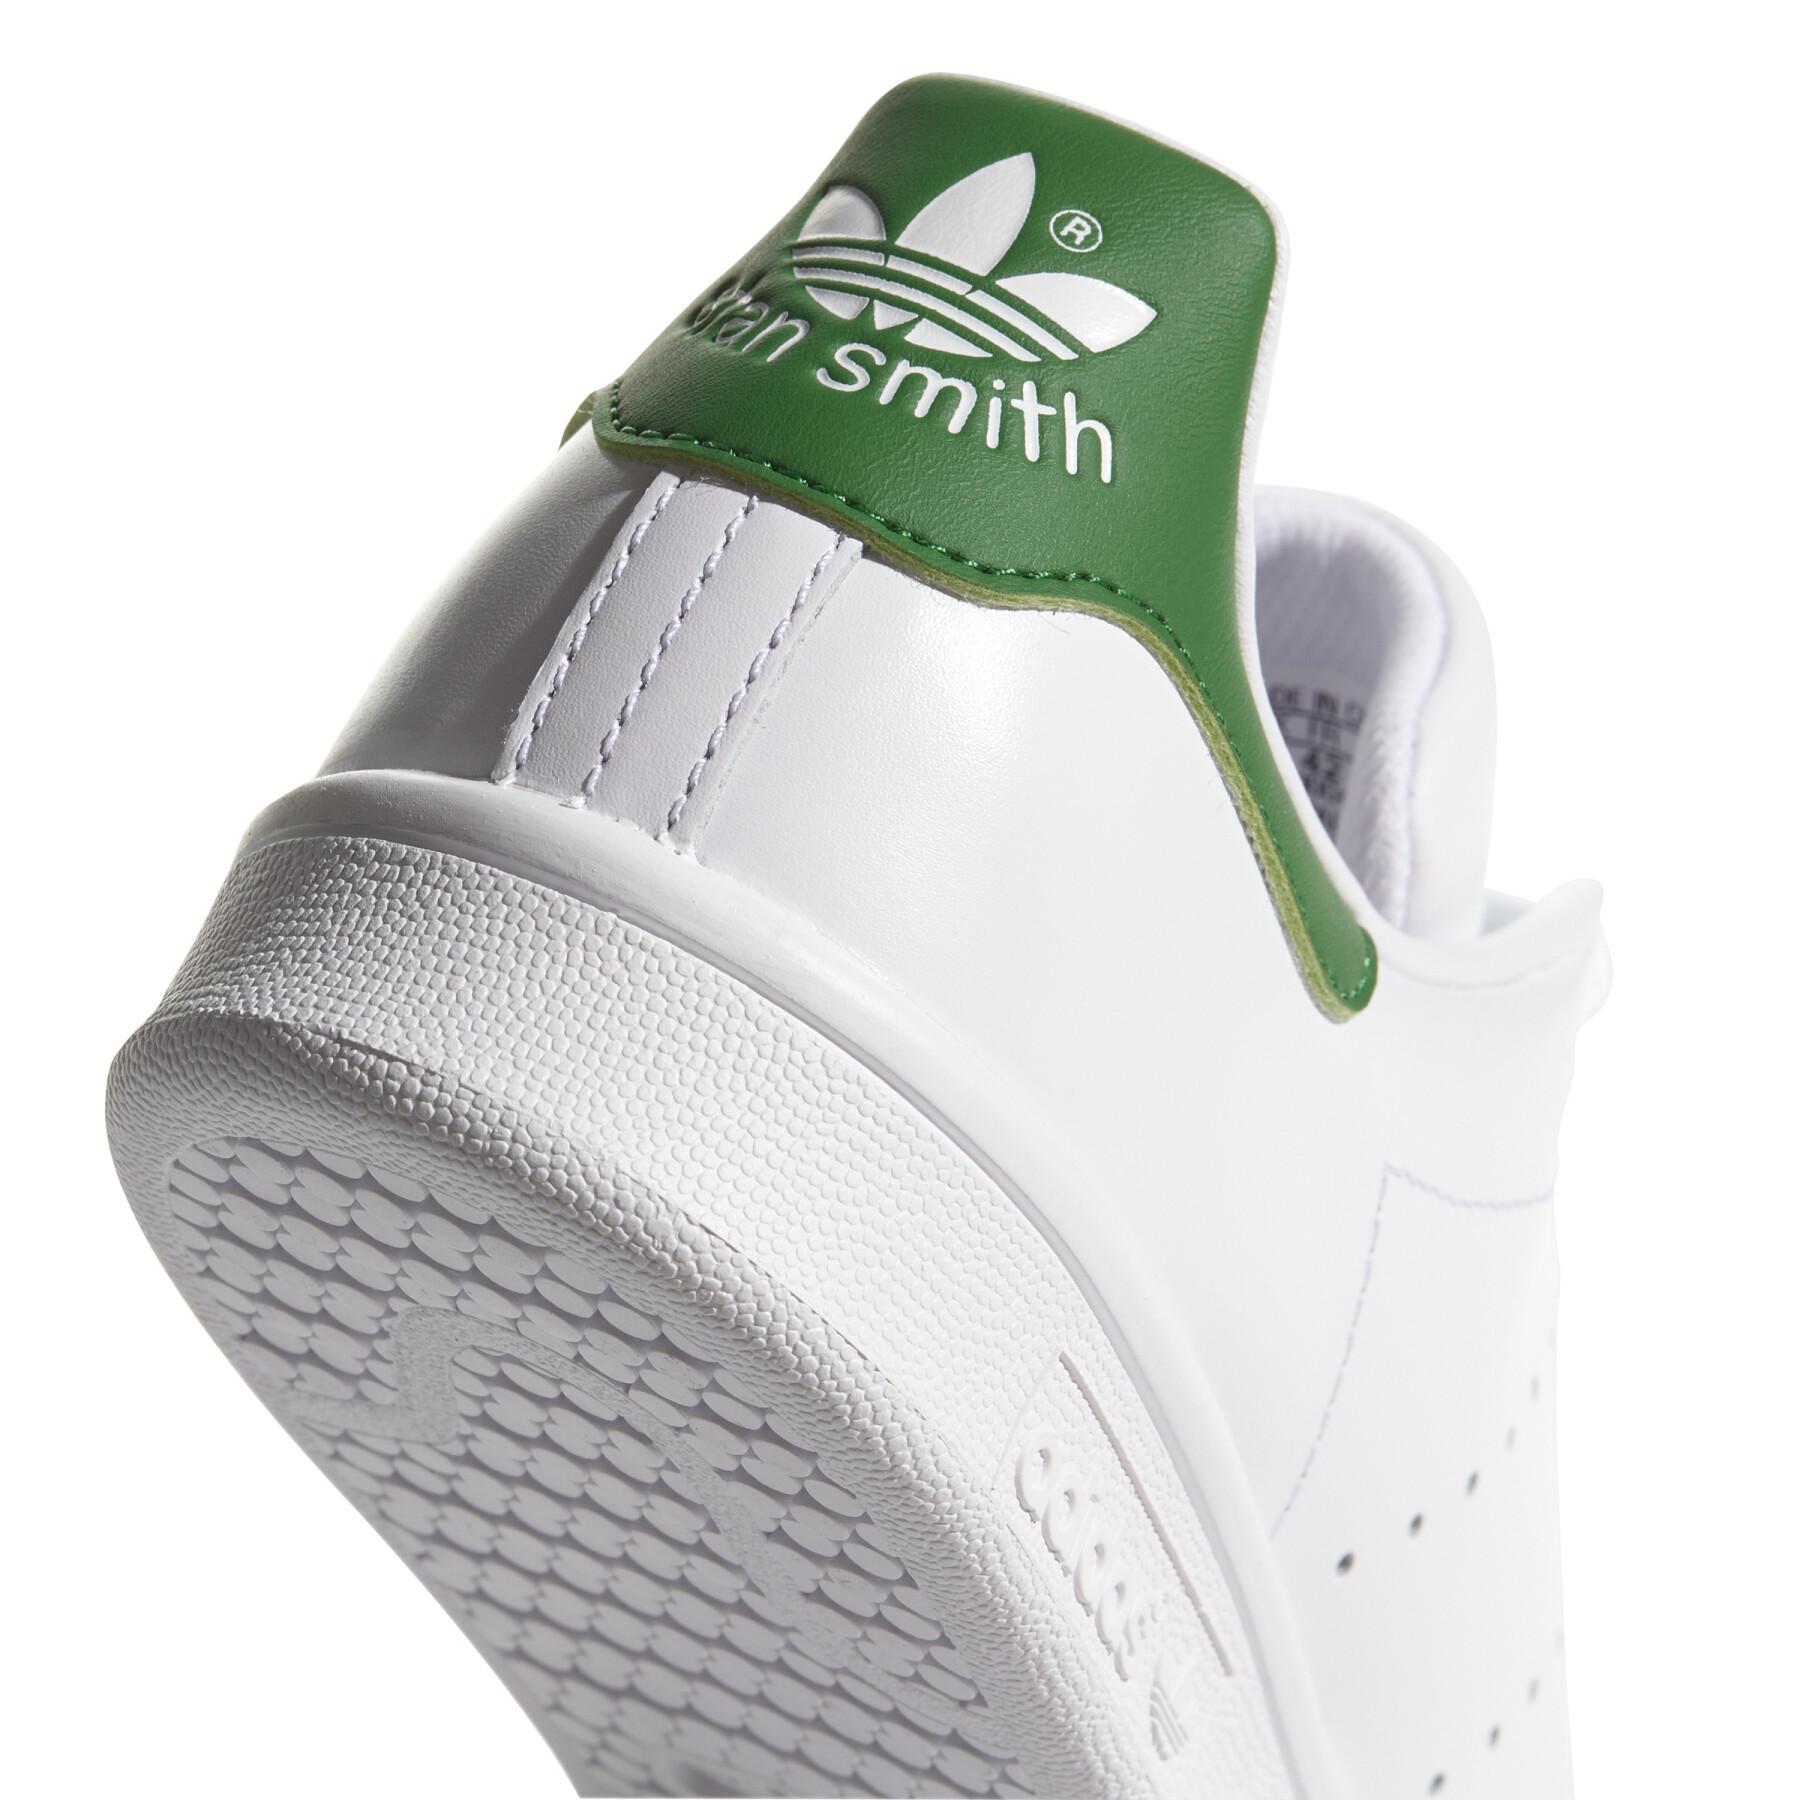 Sneakers adidas Stan Smith